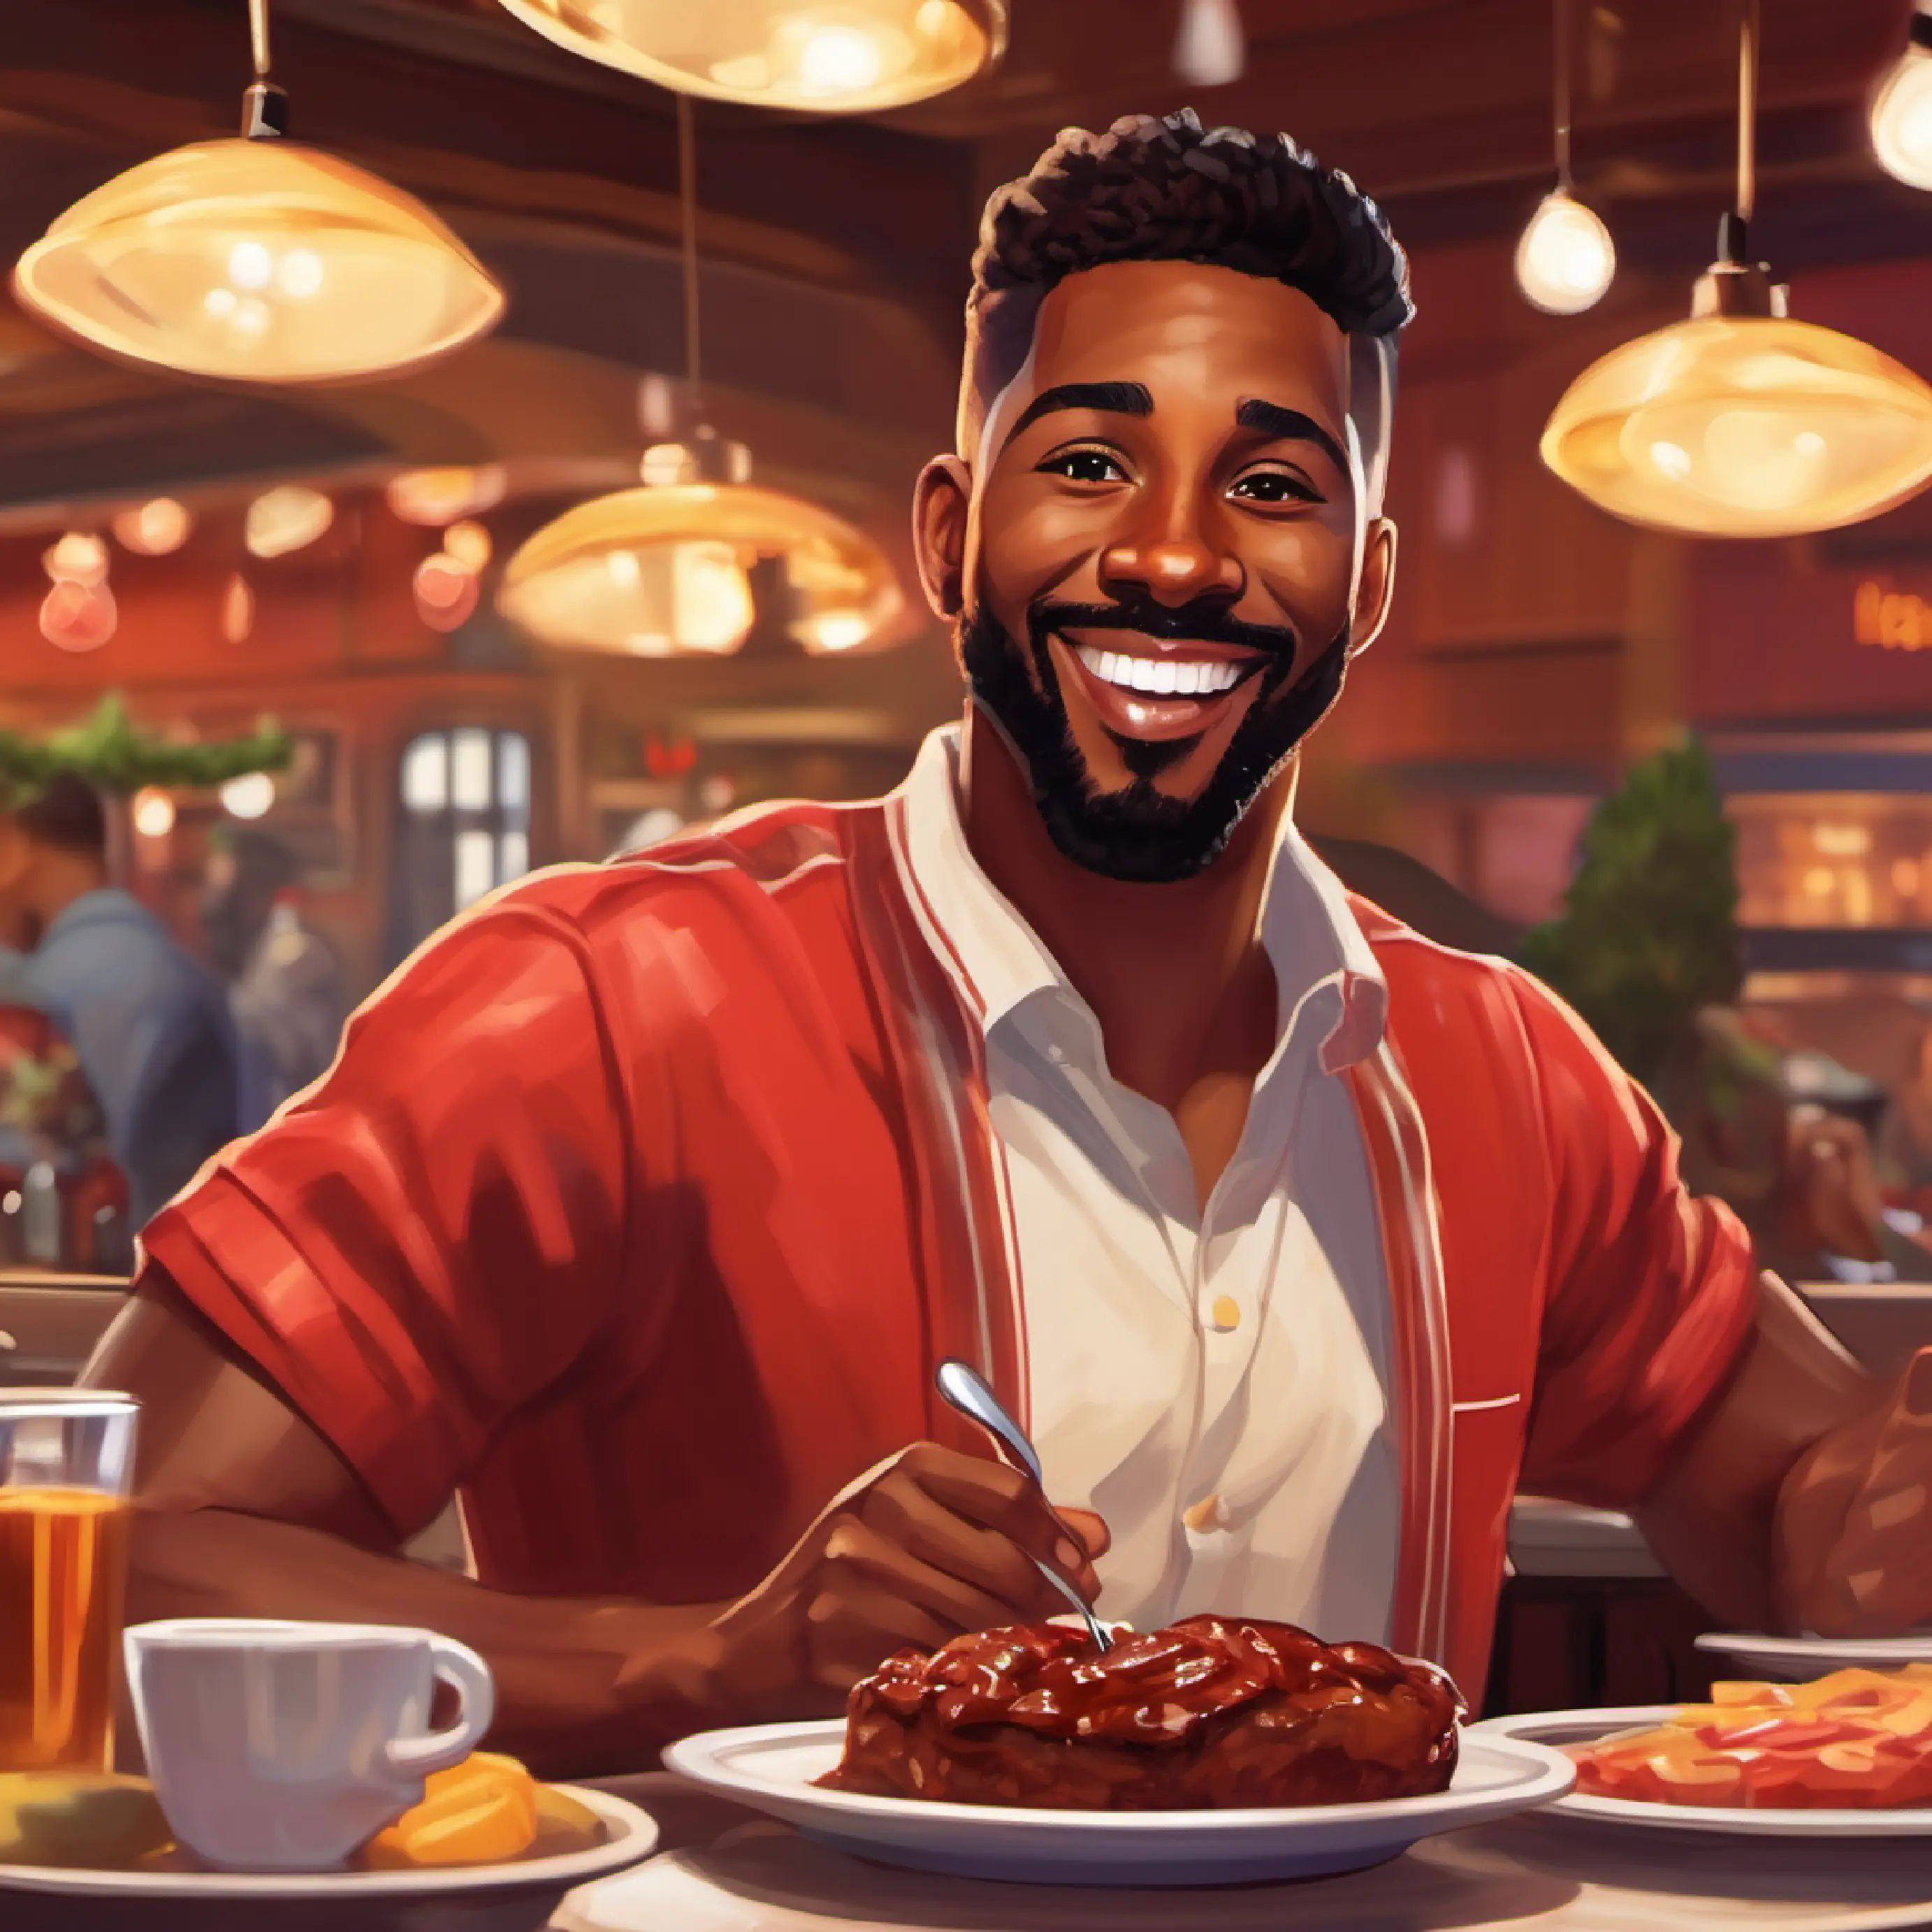 30-year-old black man, short hair, brown eyes, warm smile at a diner, ordering food, excited to try Texas BBQ.